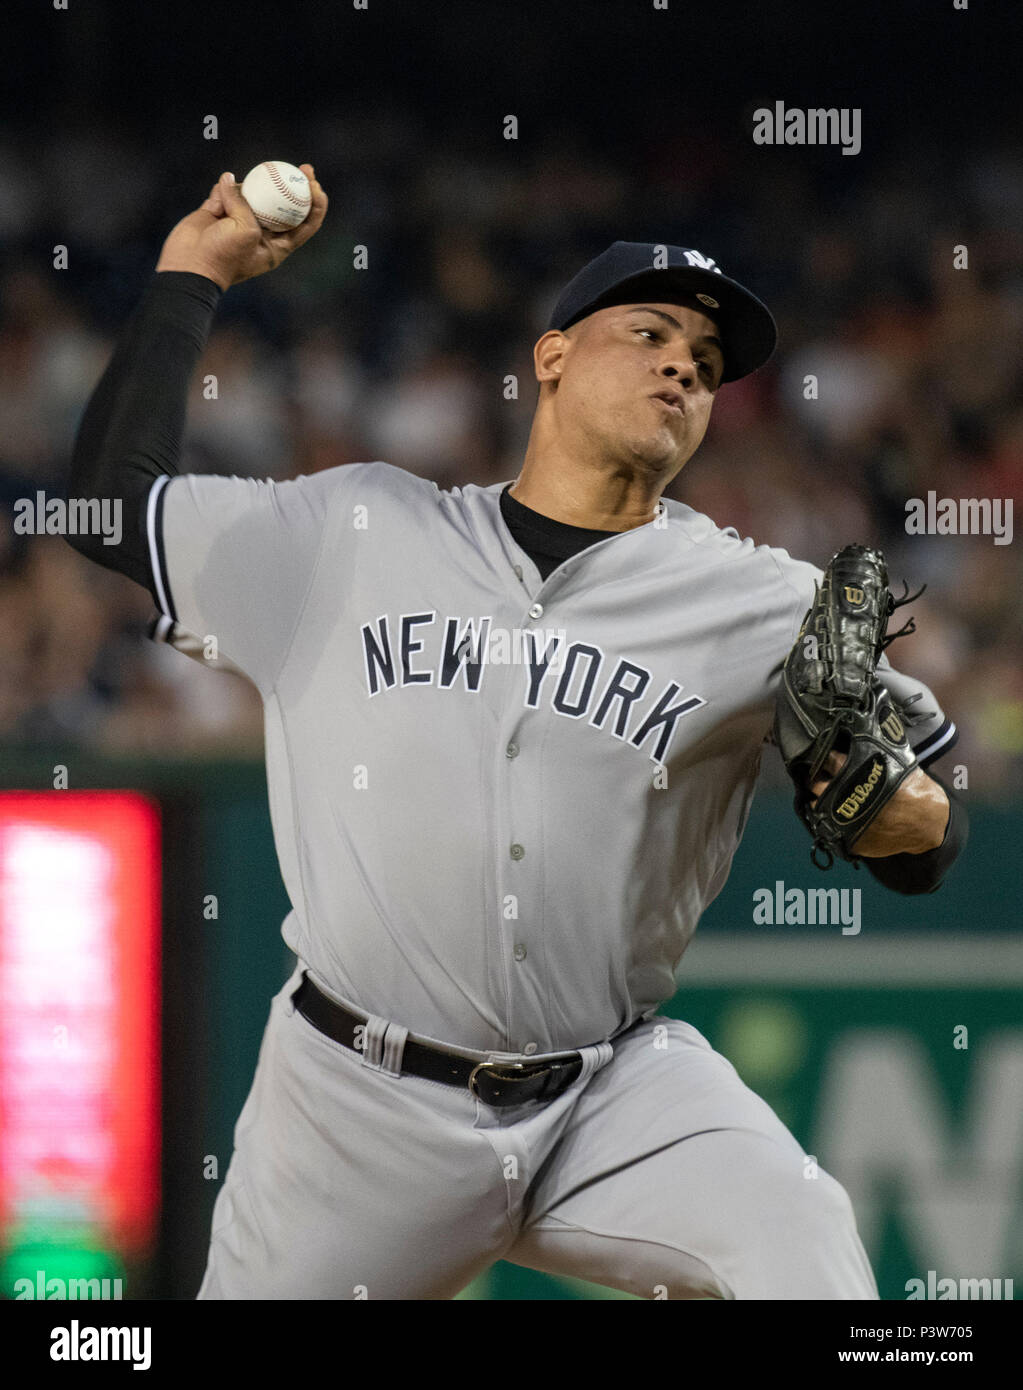 Rain. 16th May, 2018. New York Yankees relief pitcher Dellin Betances (68)  pitches in the eighth inning against the Washington Nationals at Nationals  Park in Washington, DC on Monday, June 18, 2018.